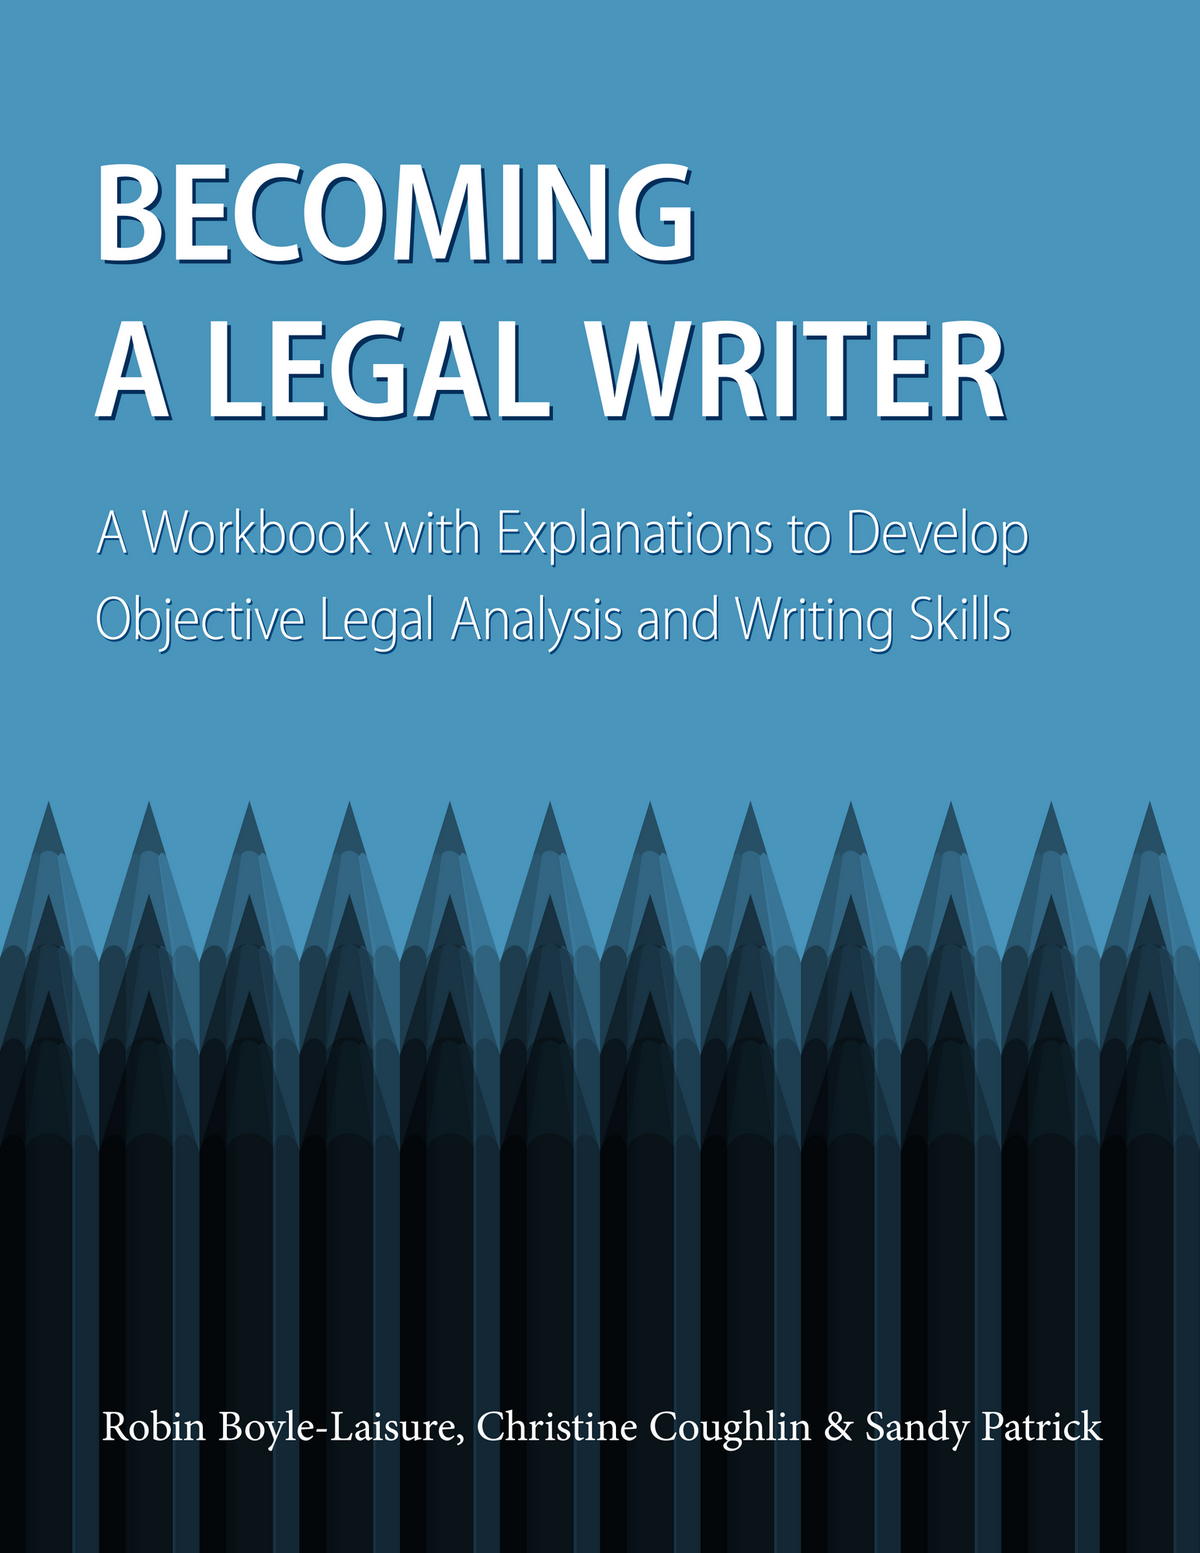 research methods and legal writing book pdf